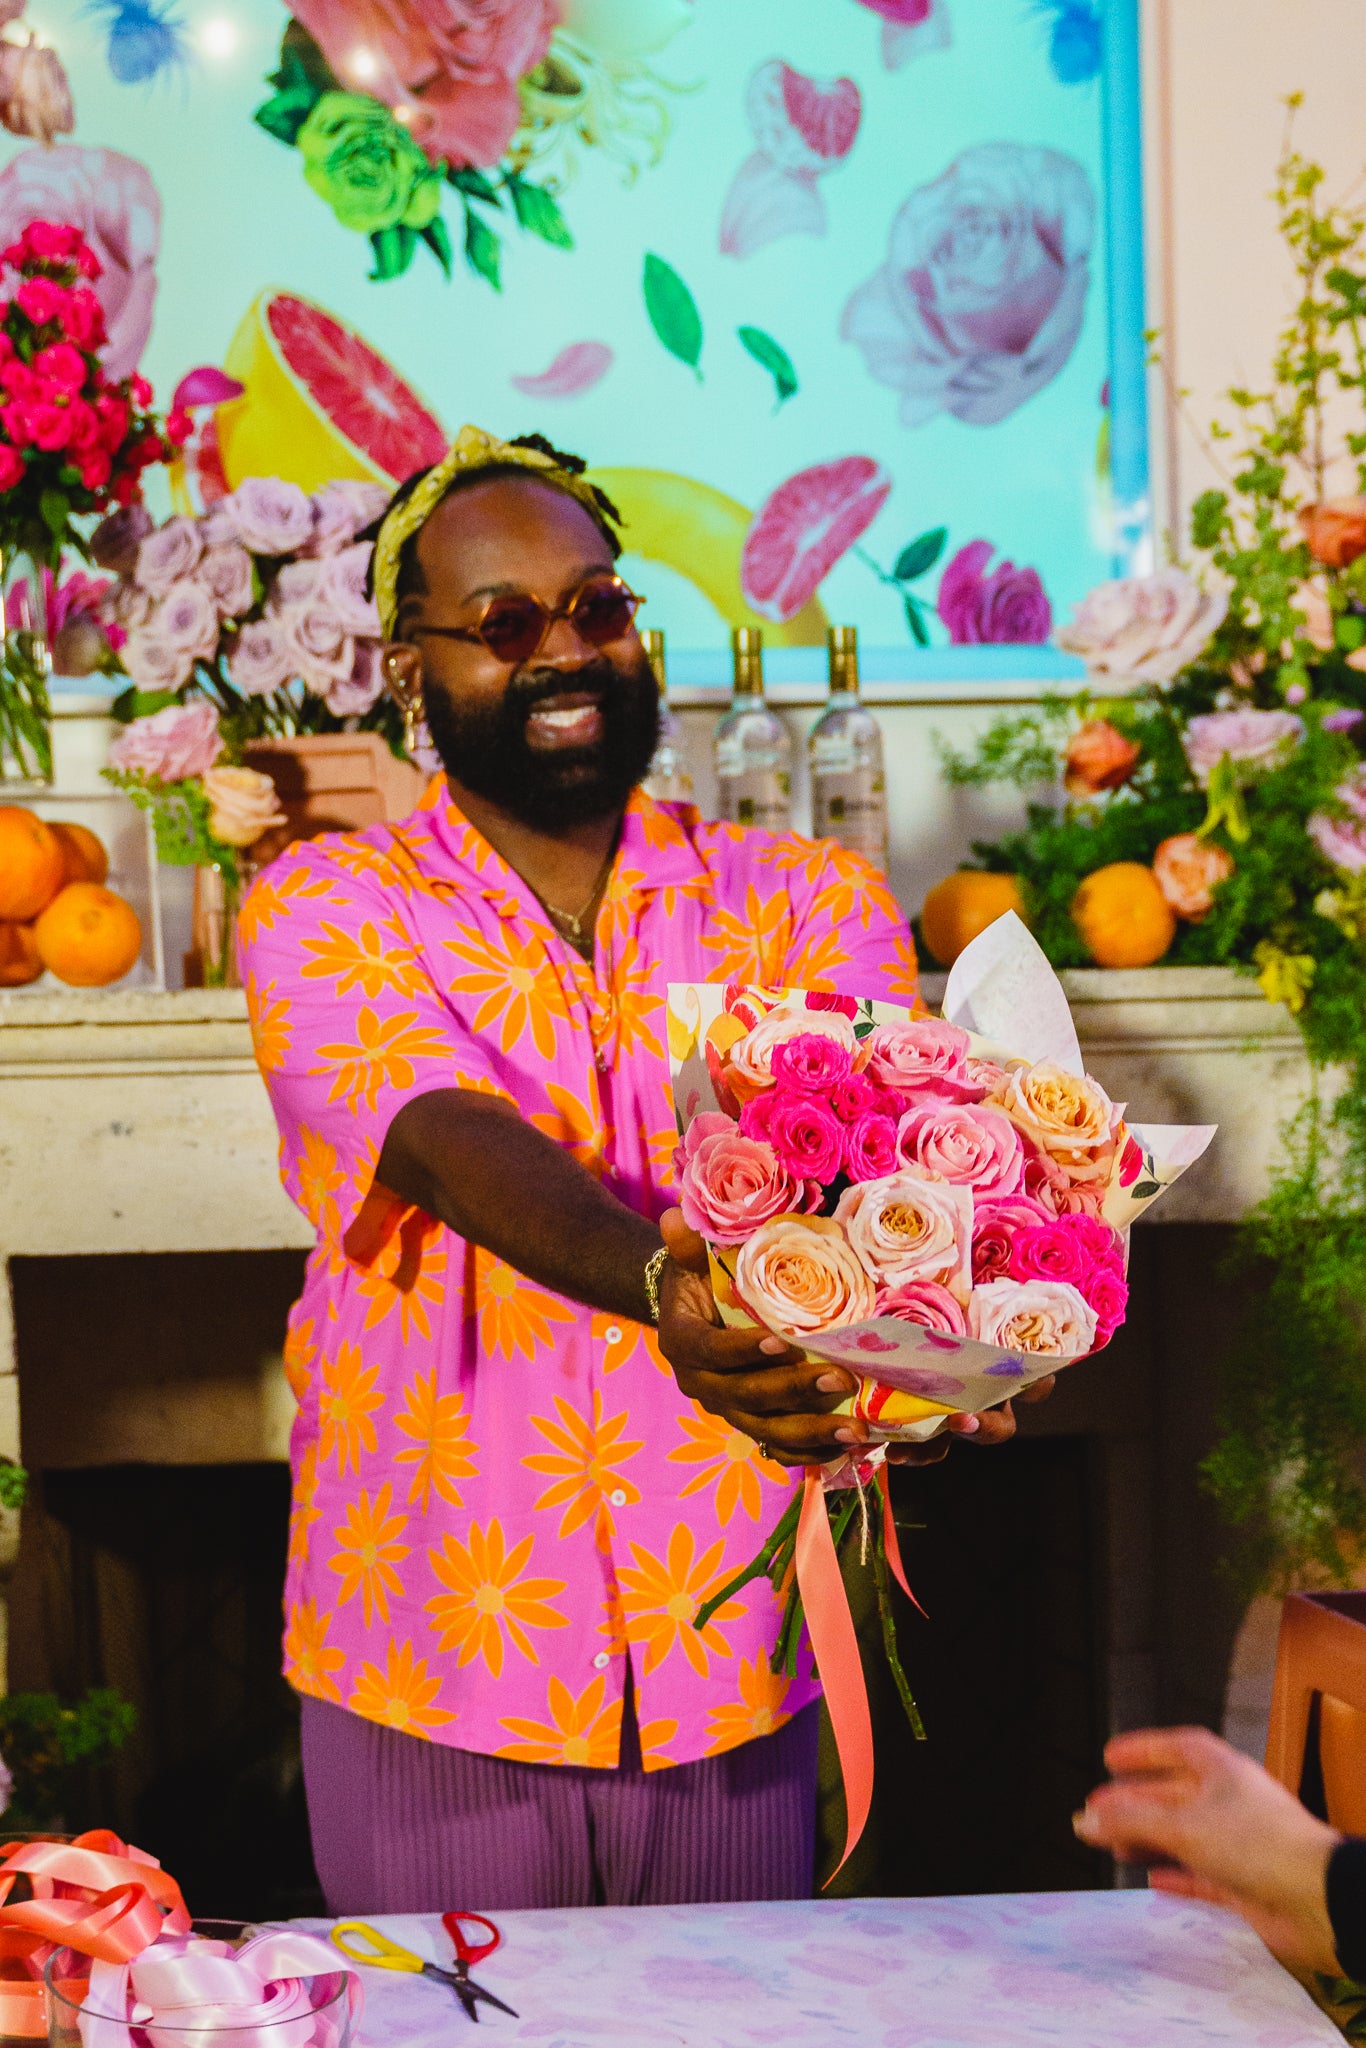 The Host With The Most: Ace At-Home Entertaining This Summer With Help From Floral Artist Maurice Harris